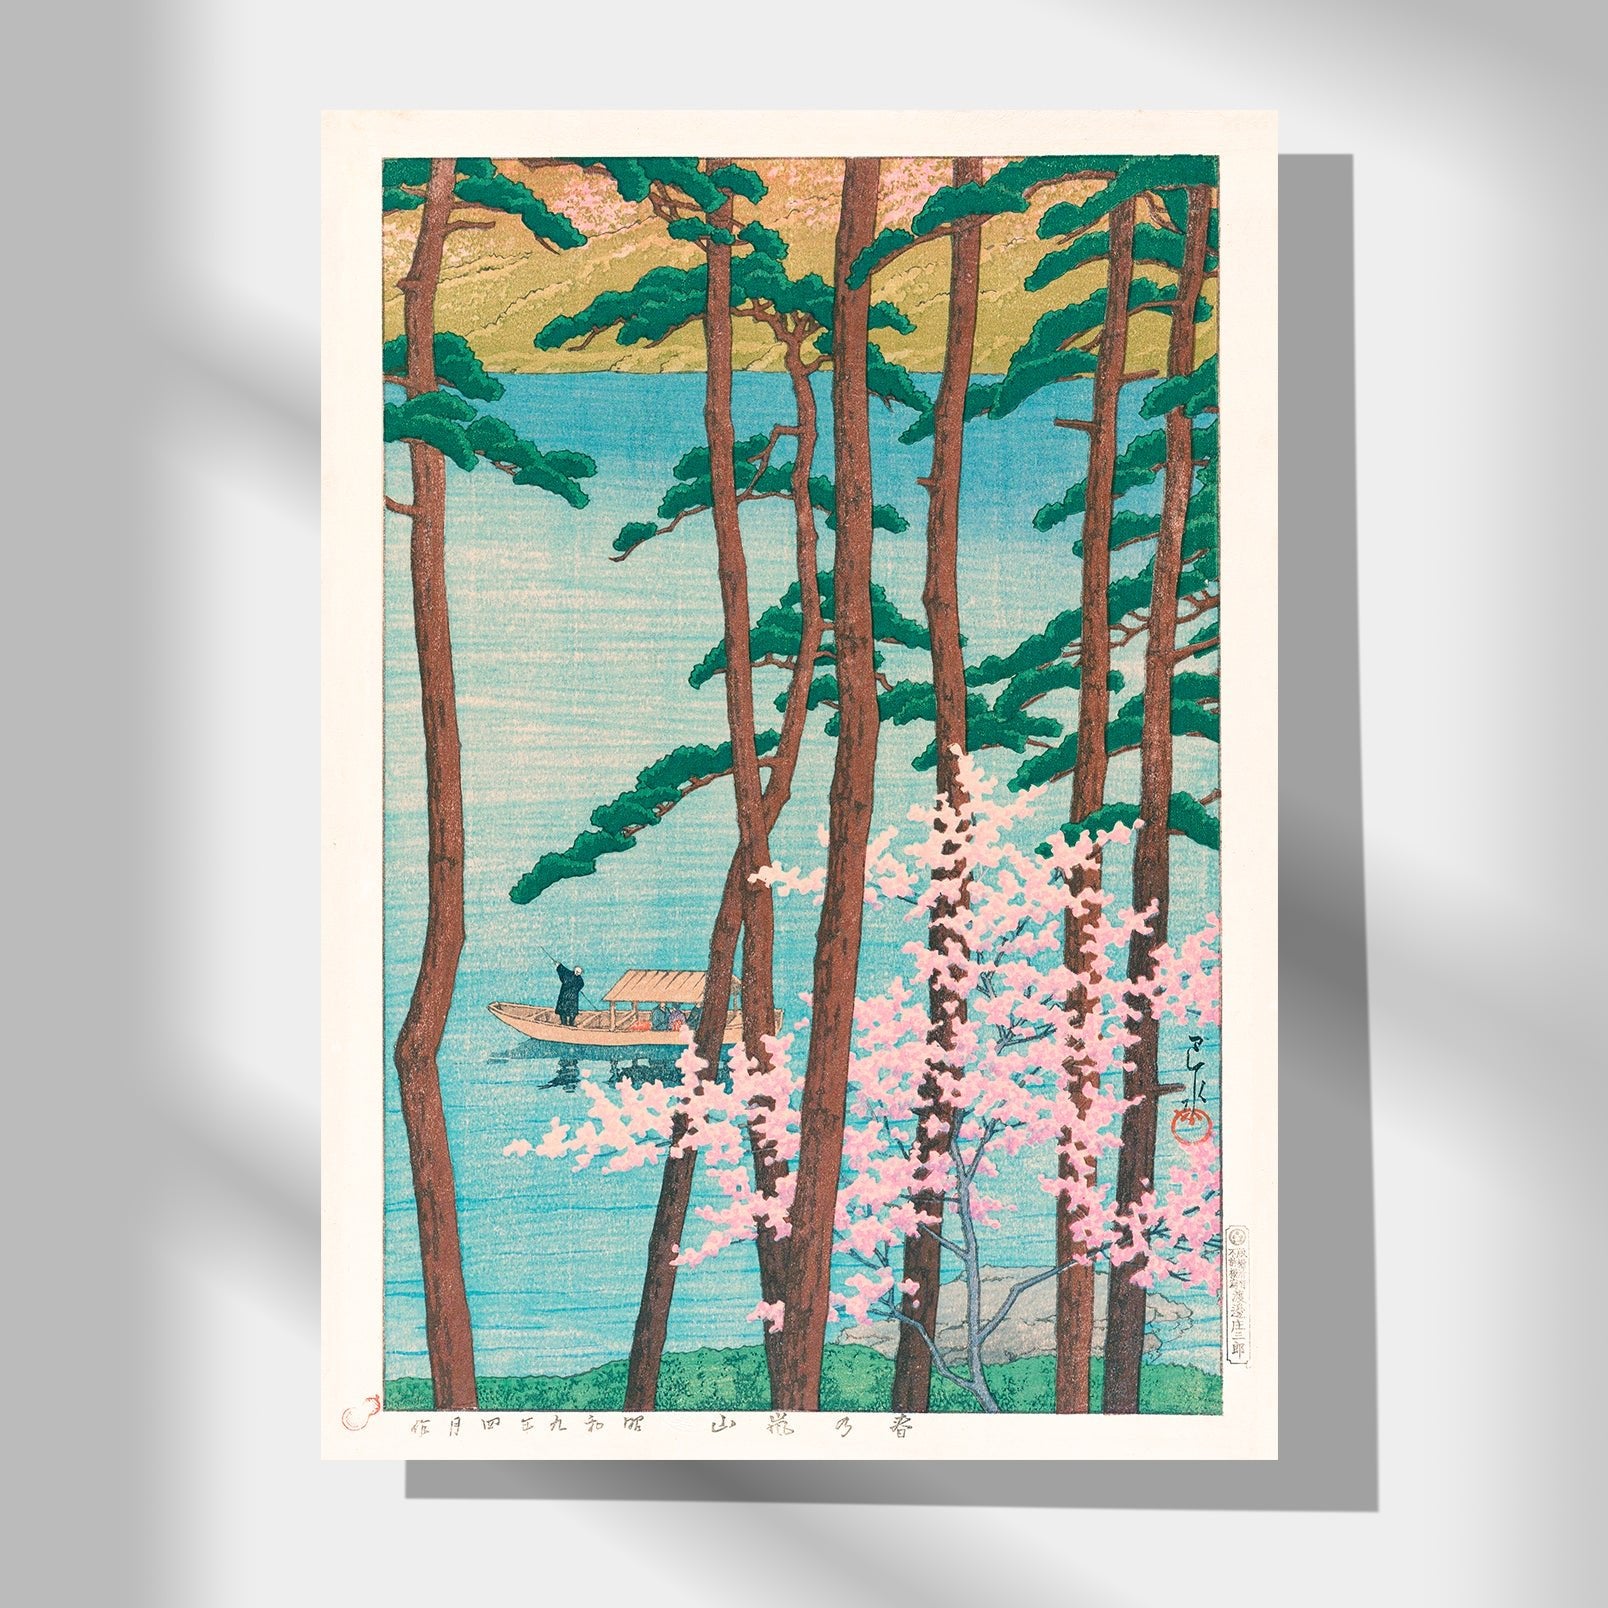 Kawase Hasui's Japanese Art Poster exhibits a boat sailing on water, surrounded by cherry trees in full bloom.